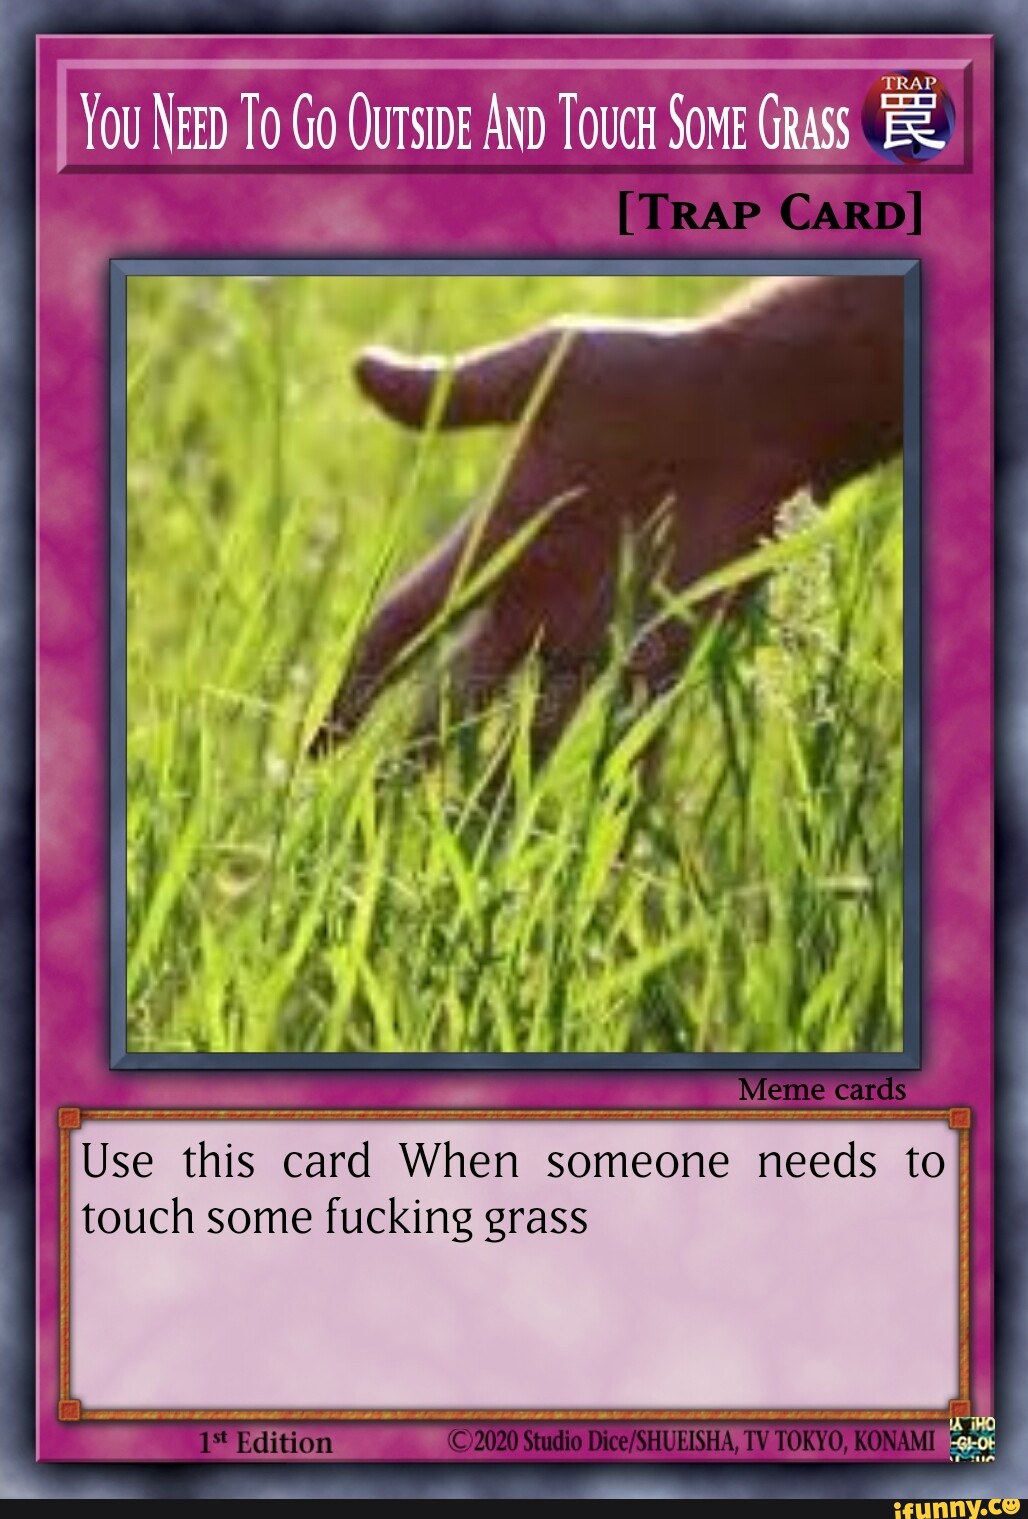 You To Go OUTSIDE AND ToucH SOME Grass Carp] Meme Use this card When  someone needs to touch some fucking grass I TY WORUO, Edition - iFunny  Brazil